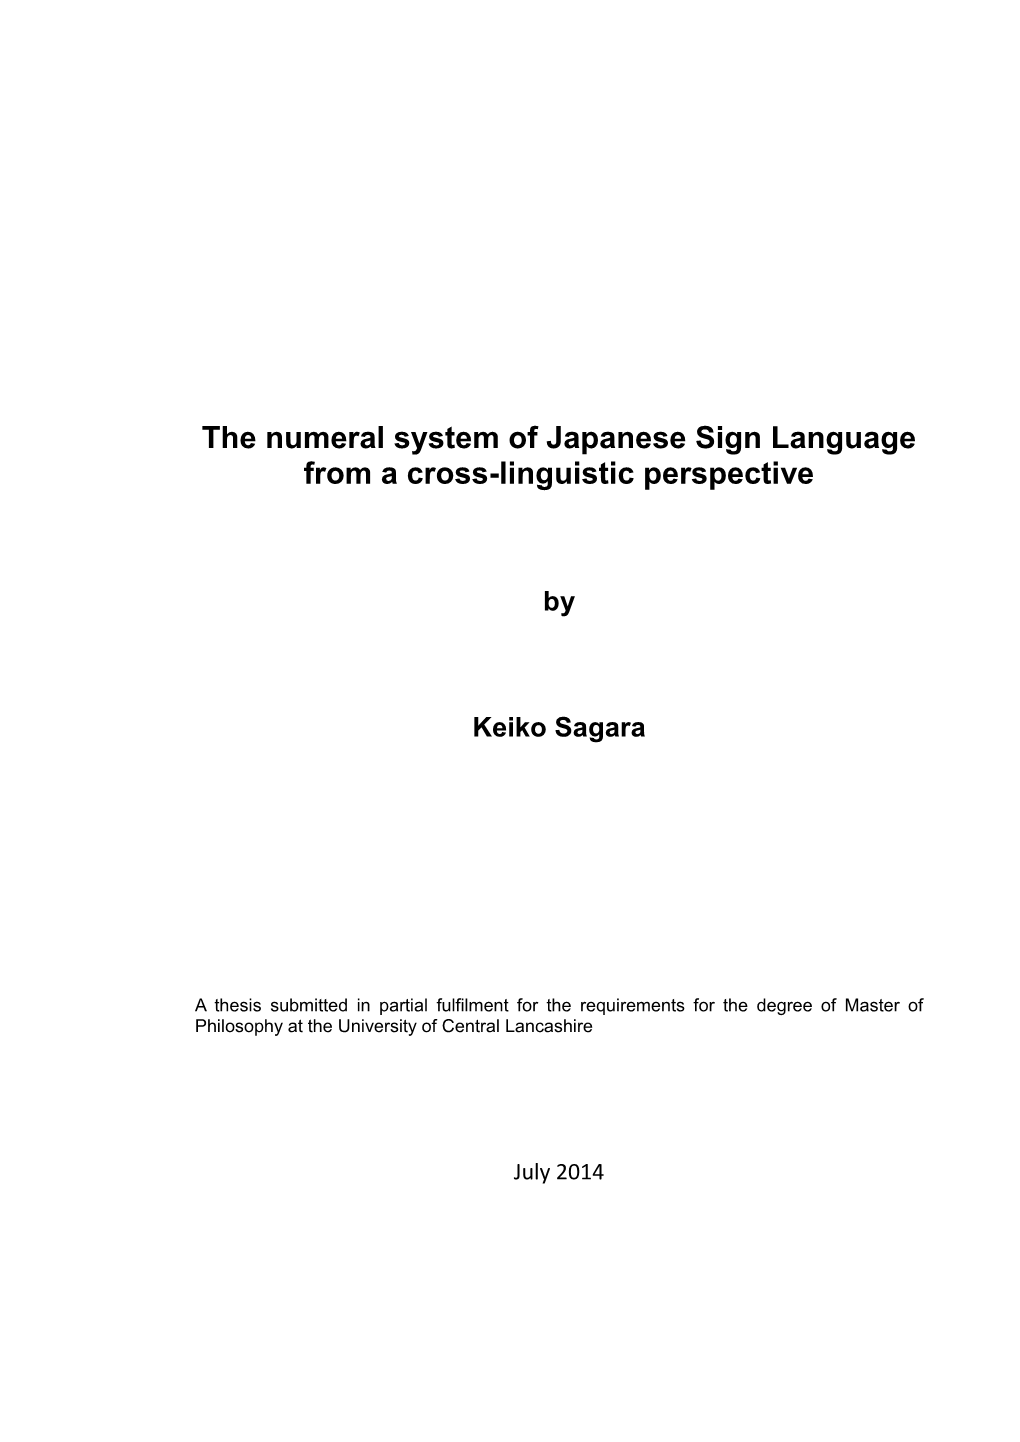 The Numeral System of Japanese Sign Language from a Cross-Linguistic Perspective